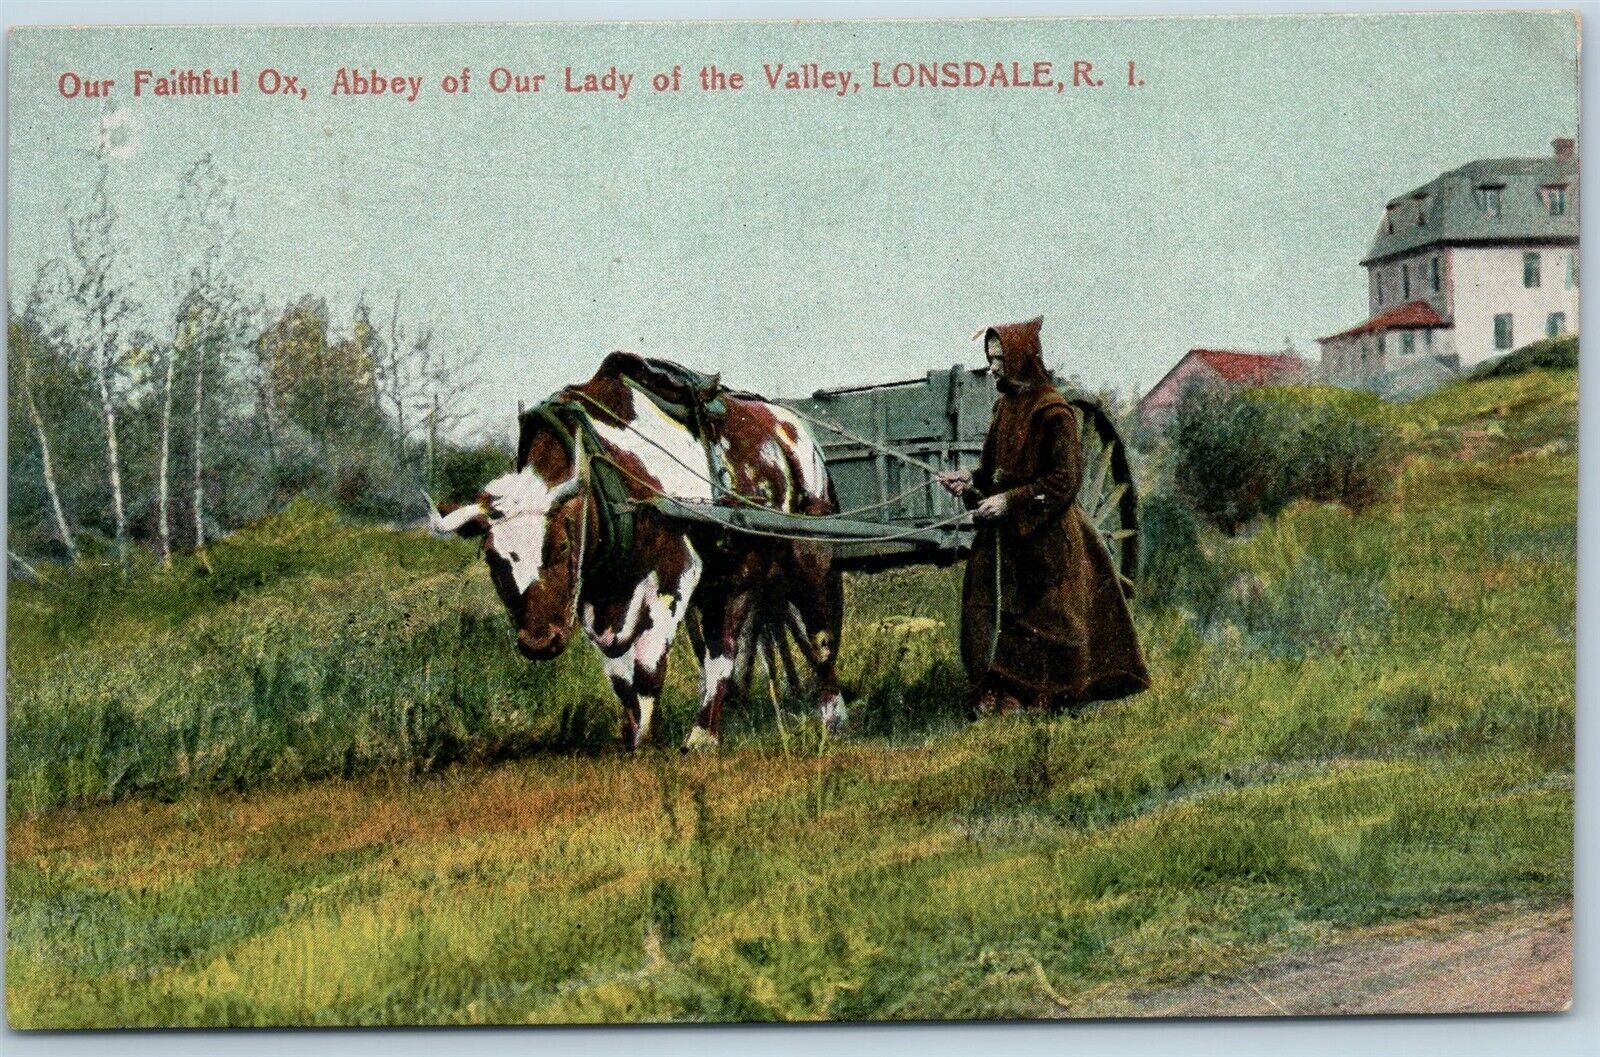 Postcard RI Lonsdale Faithful Ox Abbey Of Our Lady Of The Valley Monk c1908 Q5